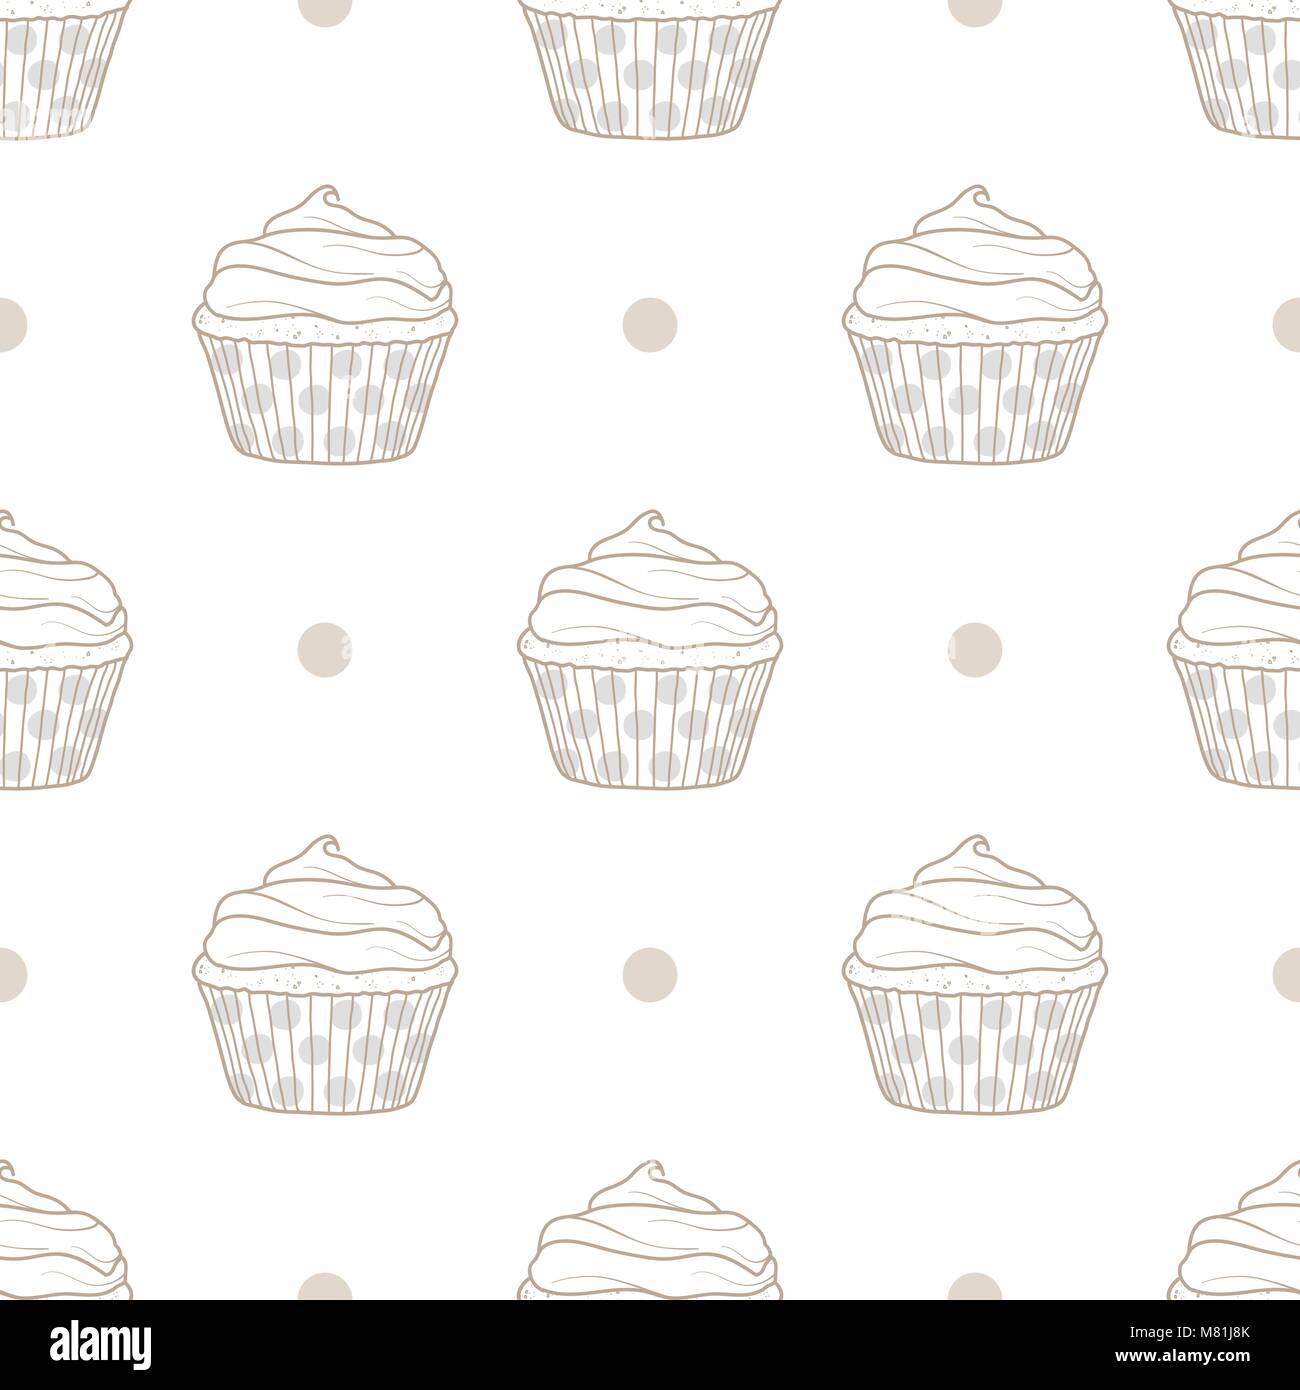 Cupcakes and dots random on white background. Cute hand drawn seamless pattern of dessert in pastel brown outline style. Stock Vector